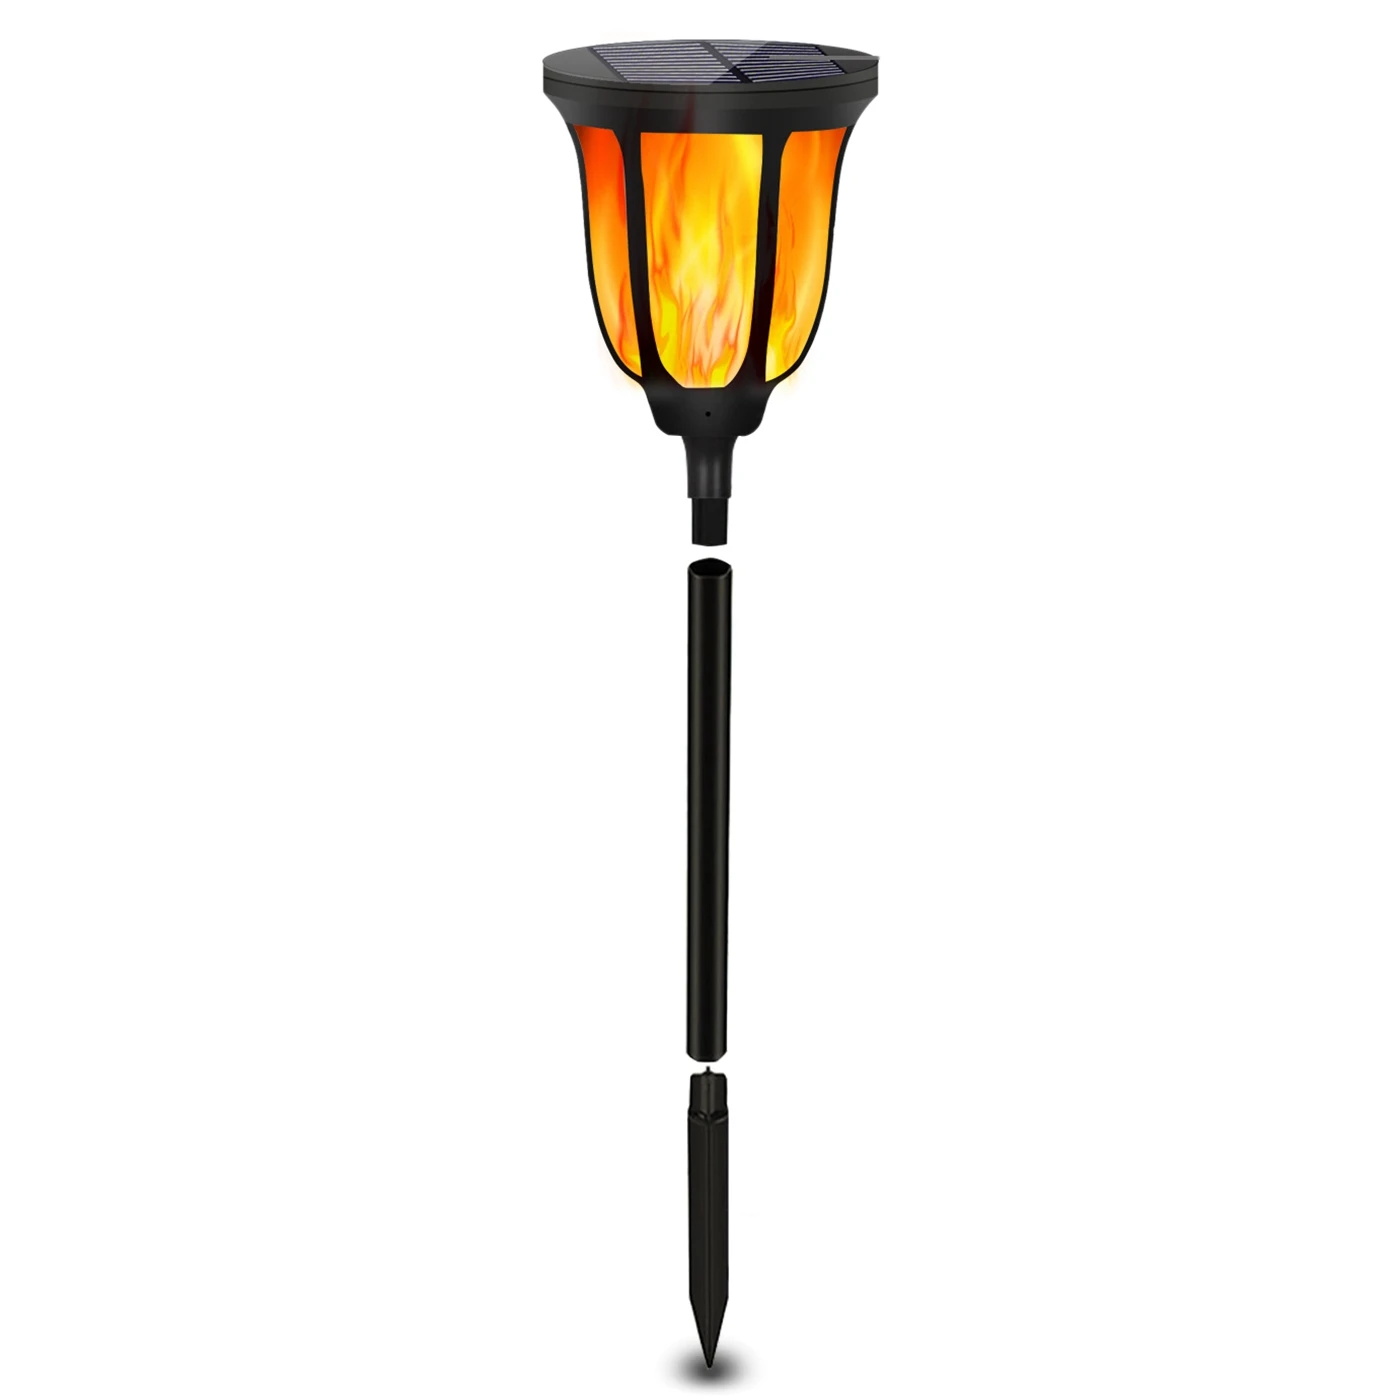 

Solar Light Outdoor 96 LED Waterproof Flickering Flame Decoration Dusk to Dawn Auto On/Off for Garden Patio Yard Pathway